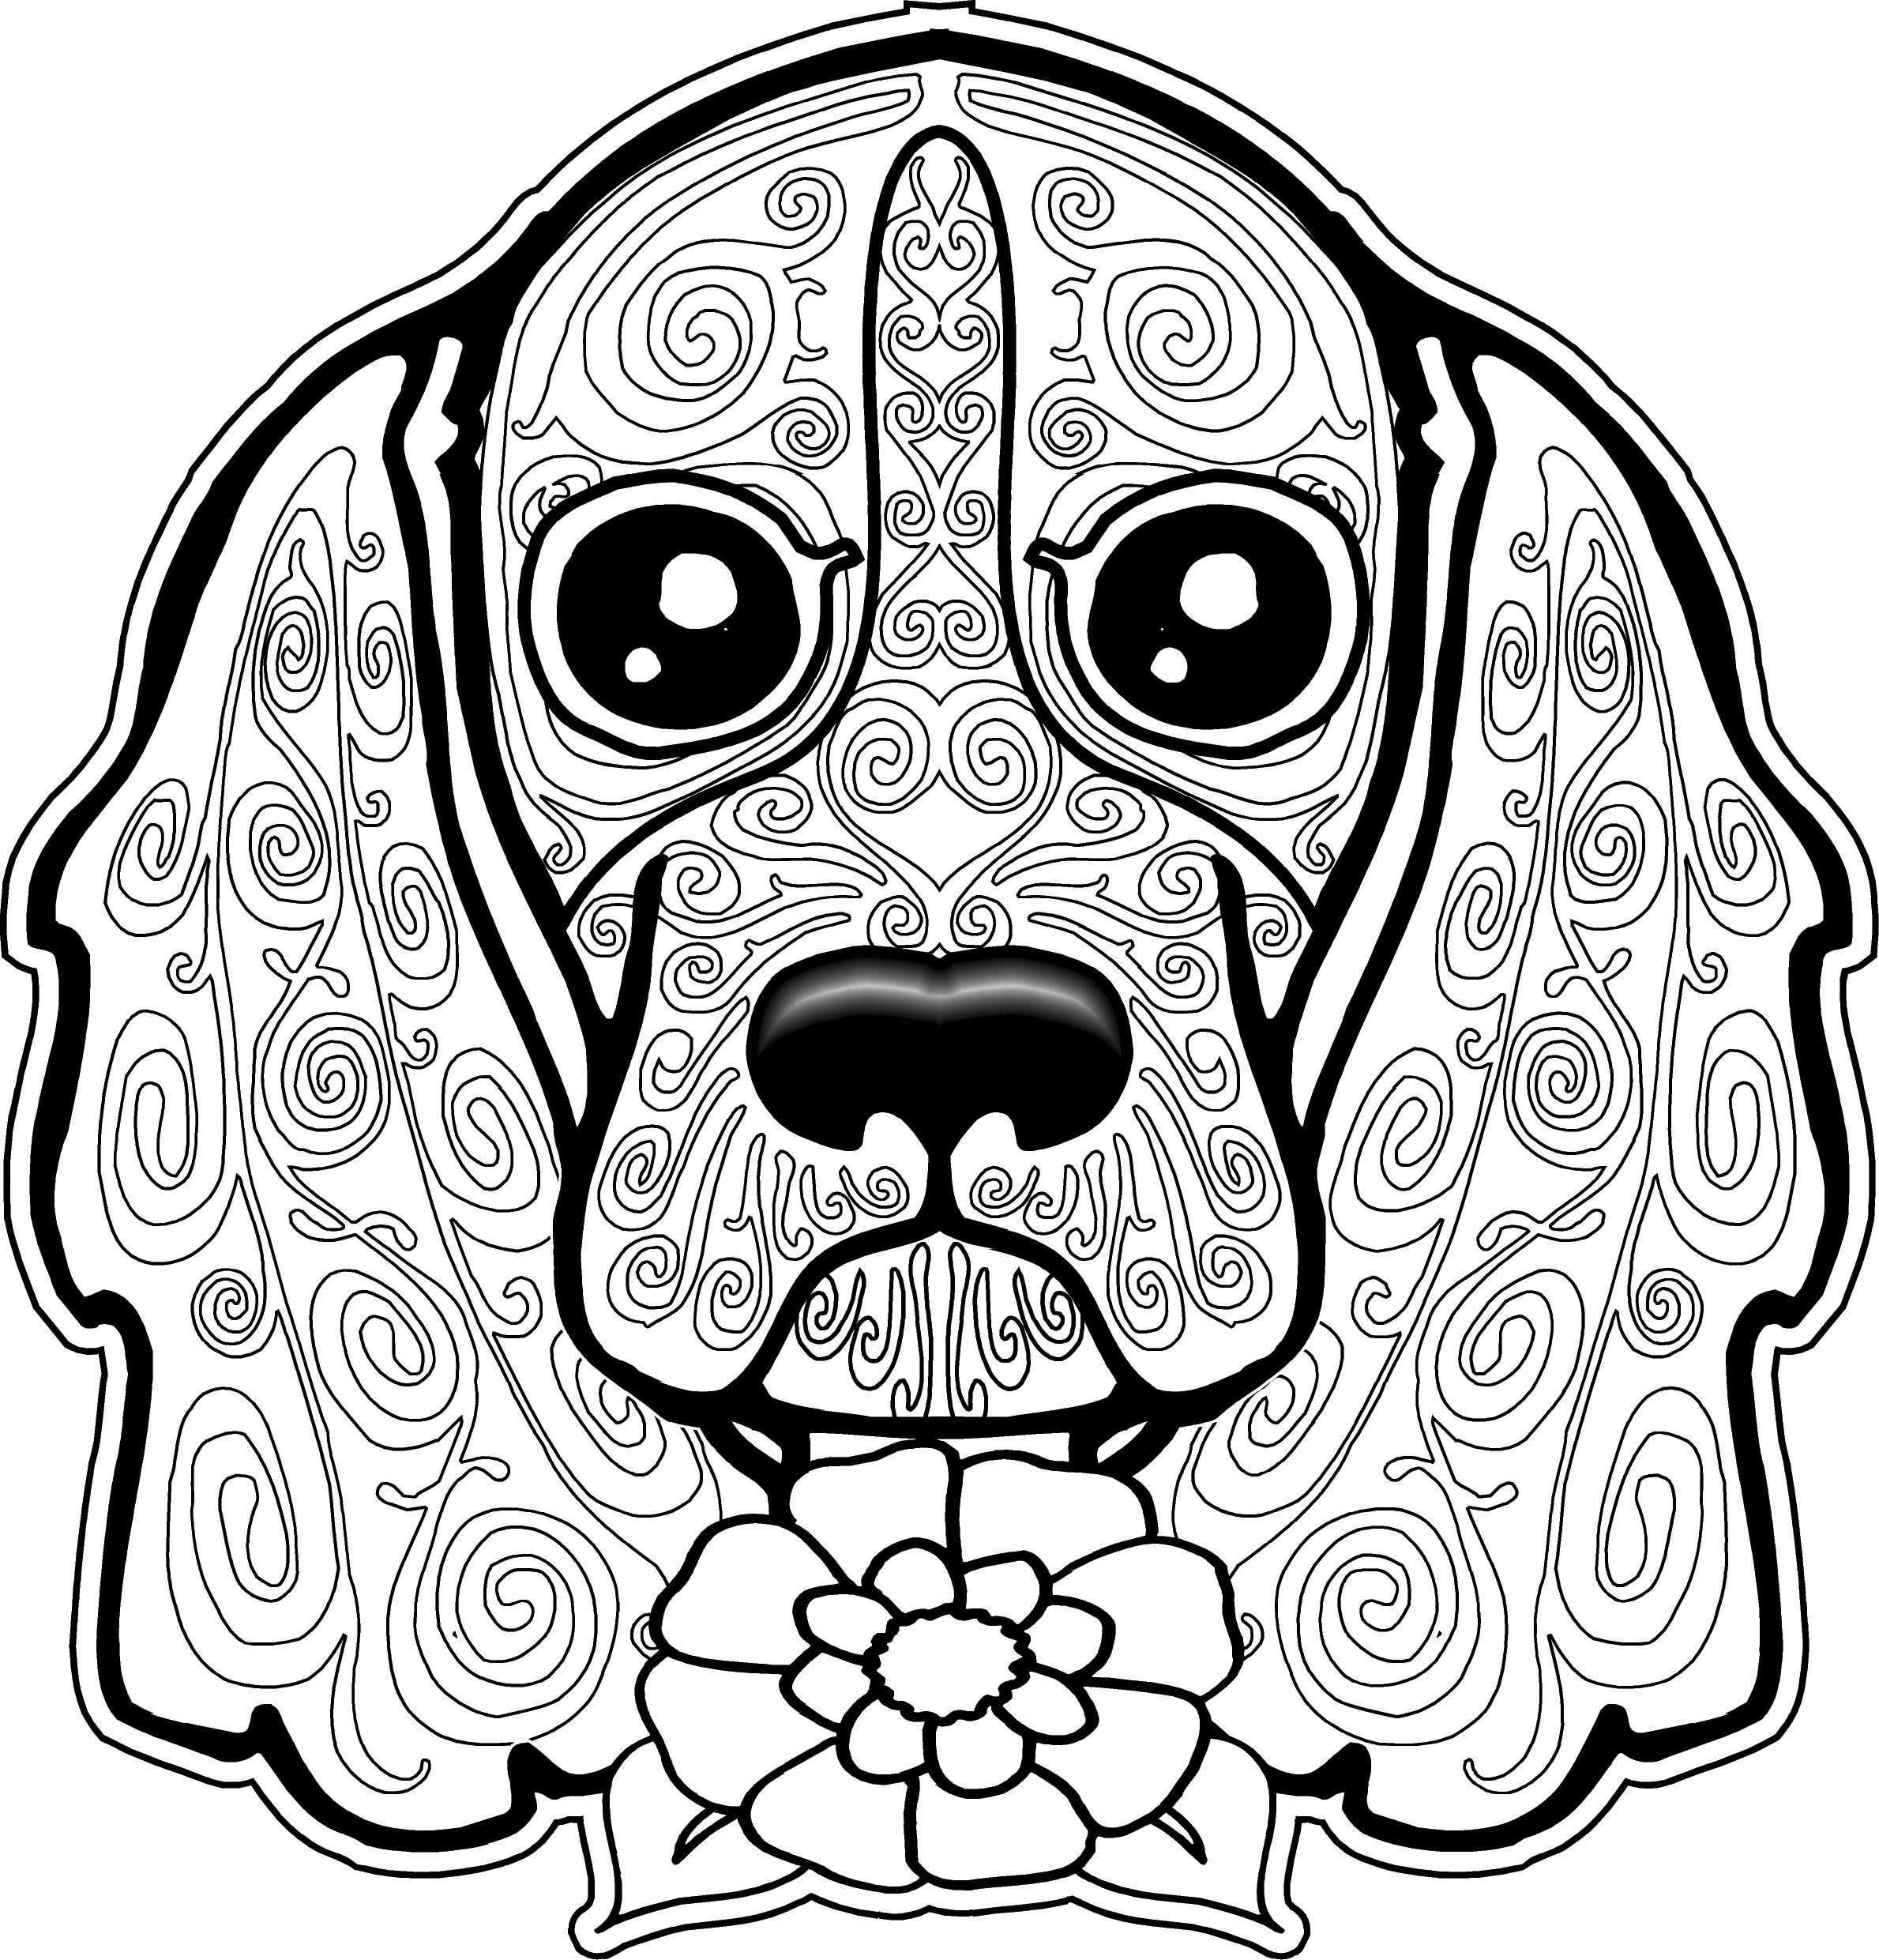 Dog Coloring Page Dog Coloring Pages Free Coloring Page Free